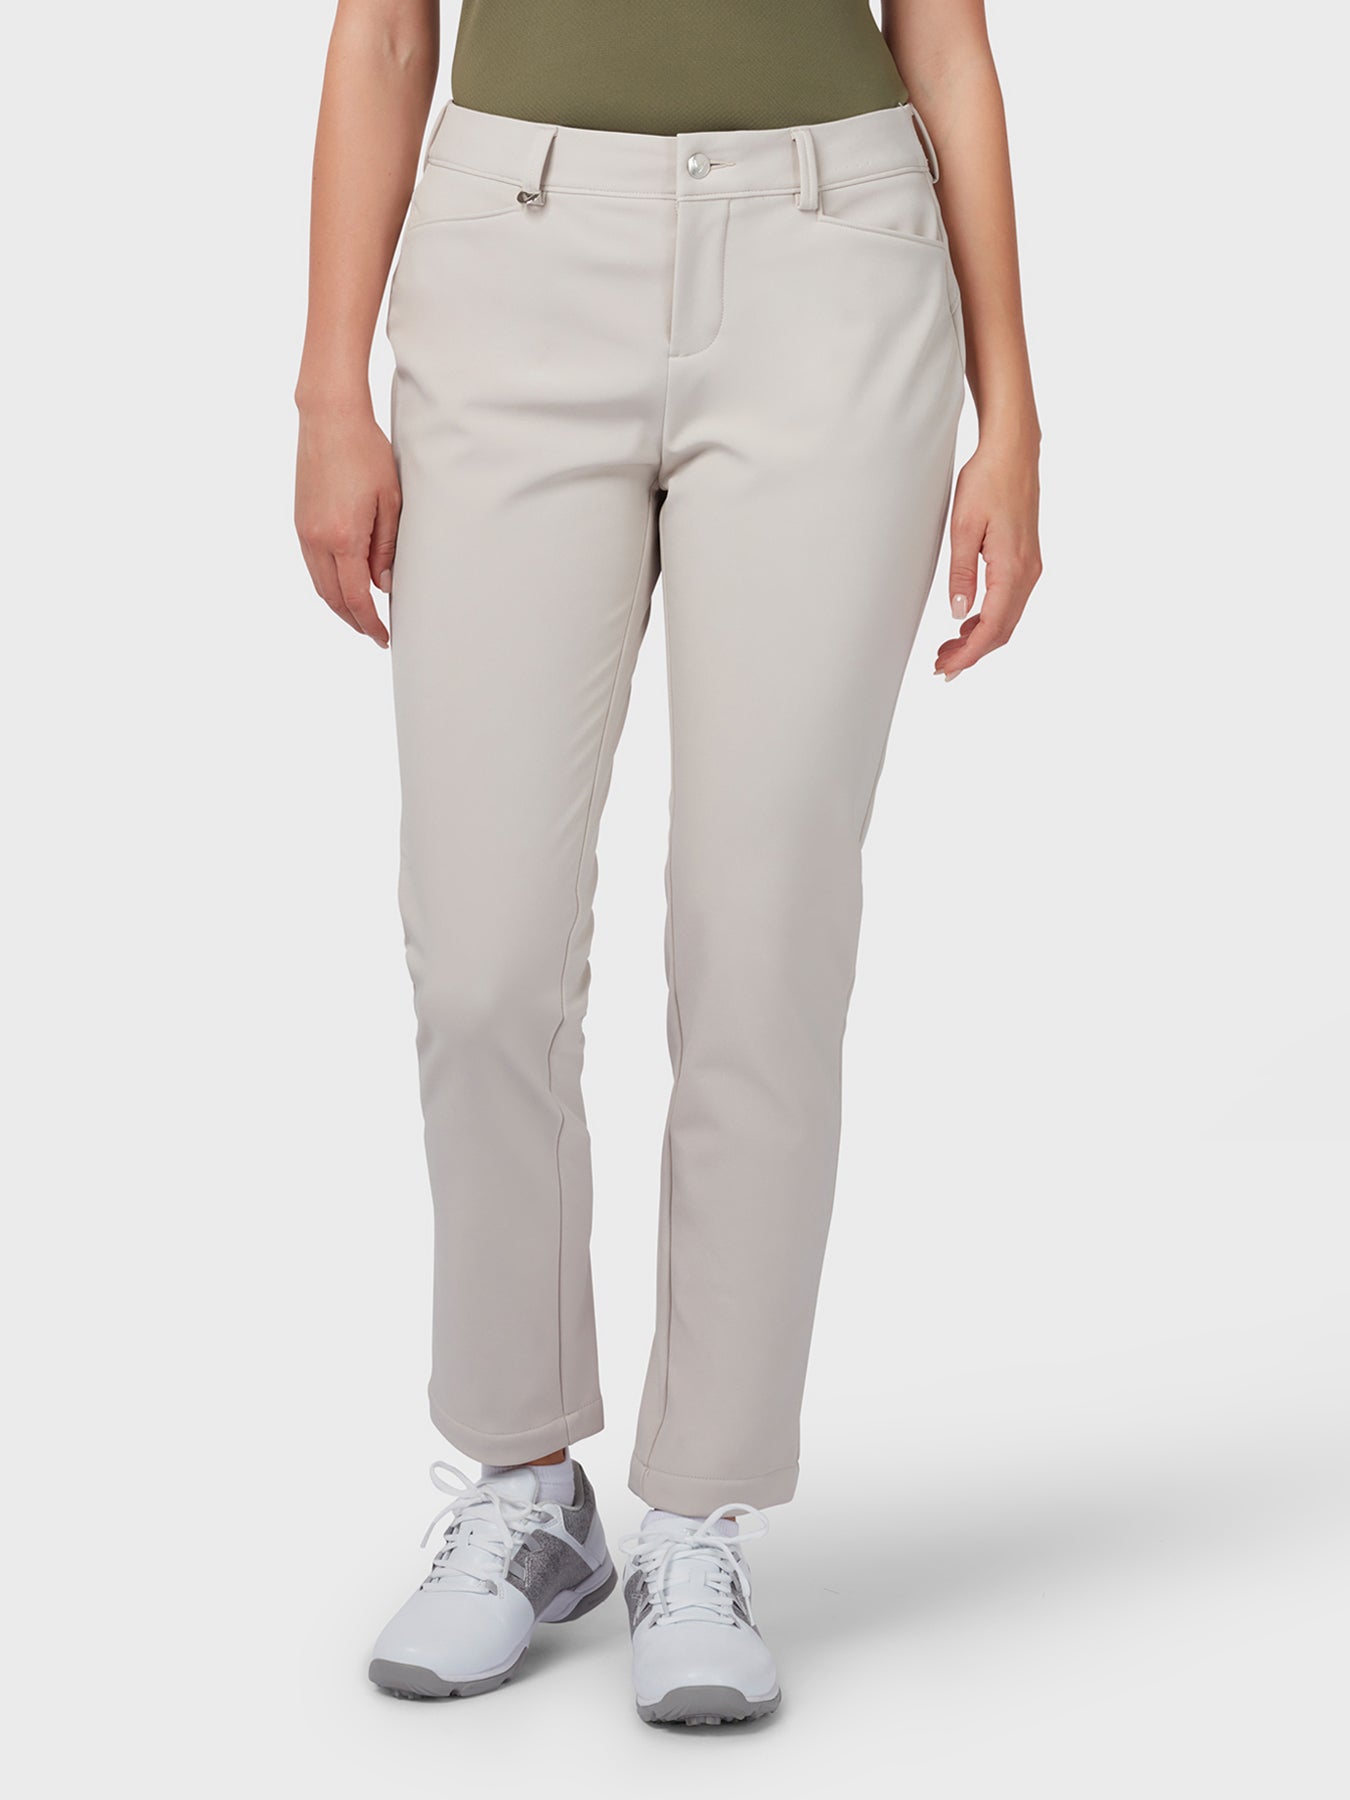 View Womens Thermal Trouser In Chateau Grey Chateau Grey XXXL 29 information